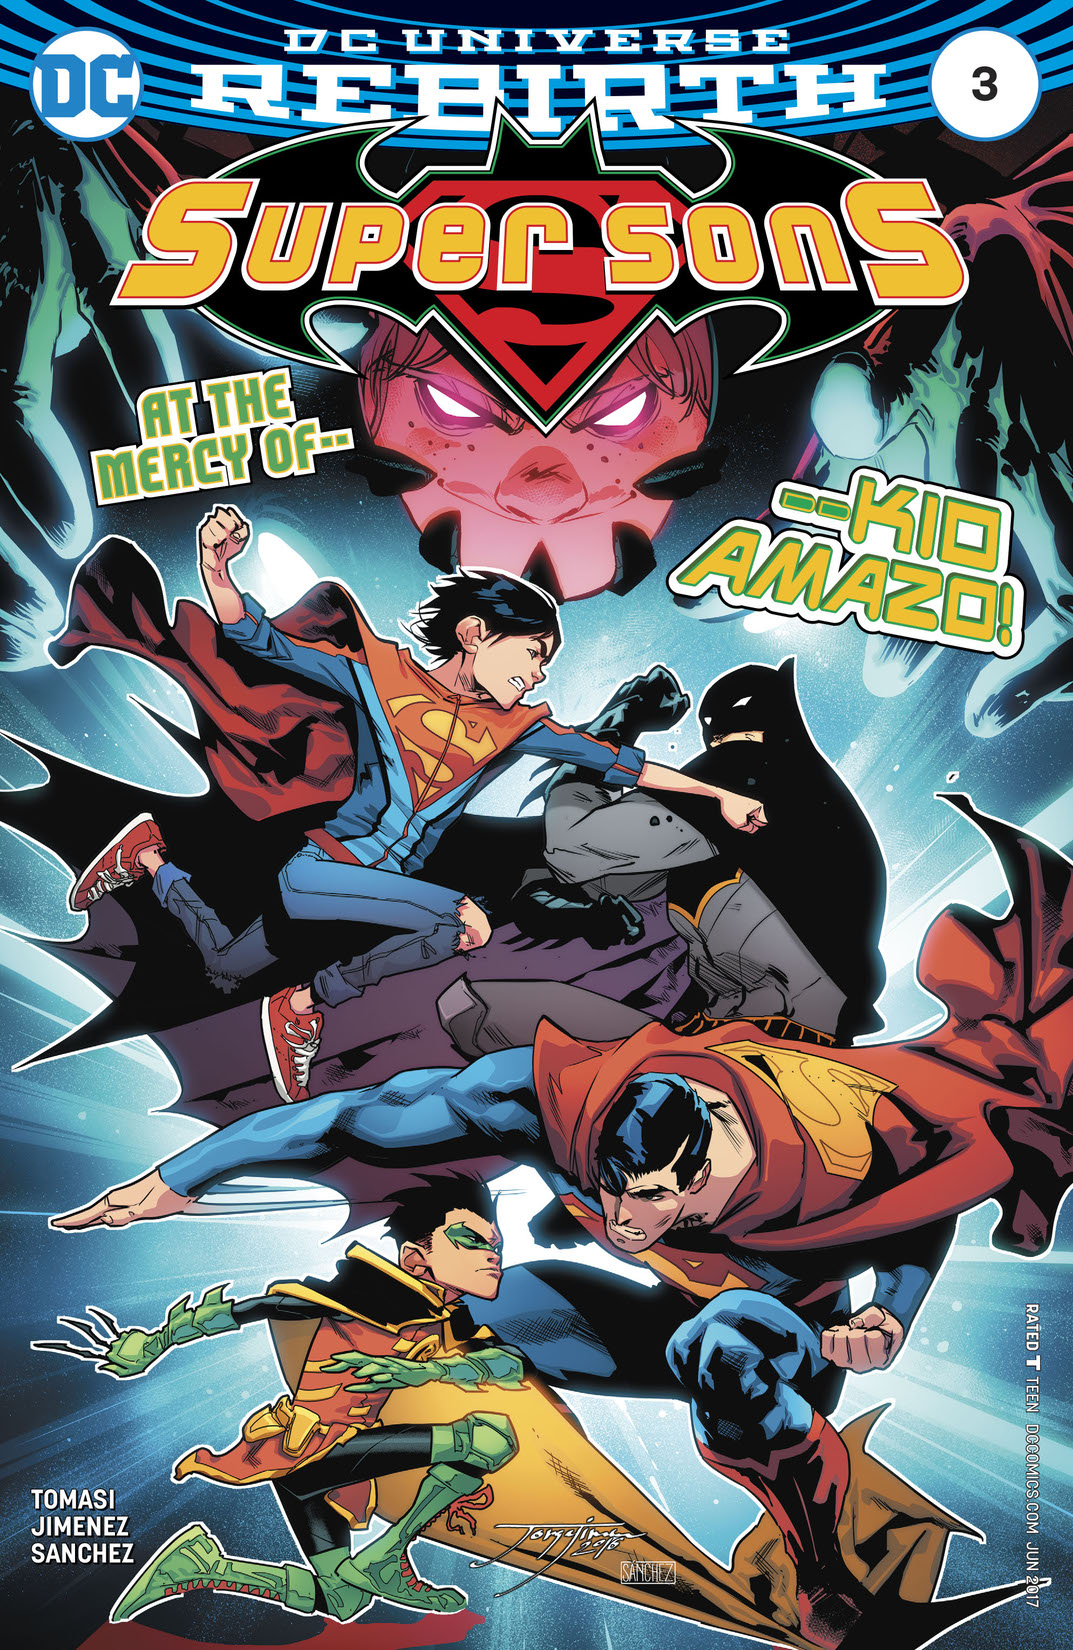 Super Sons (2017-) #3 preview images